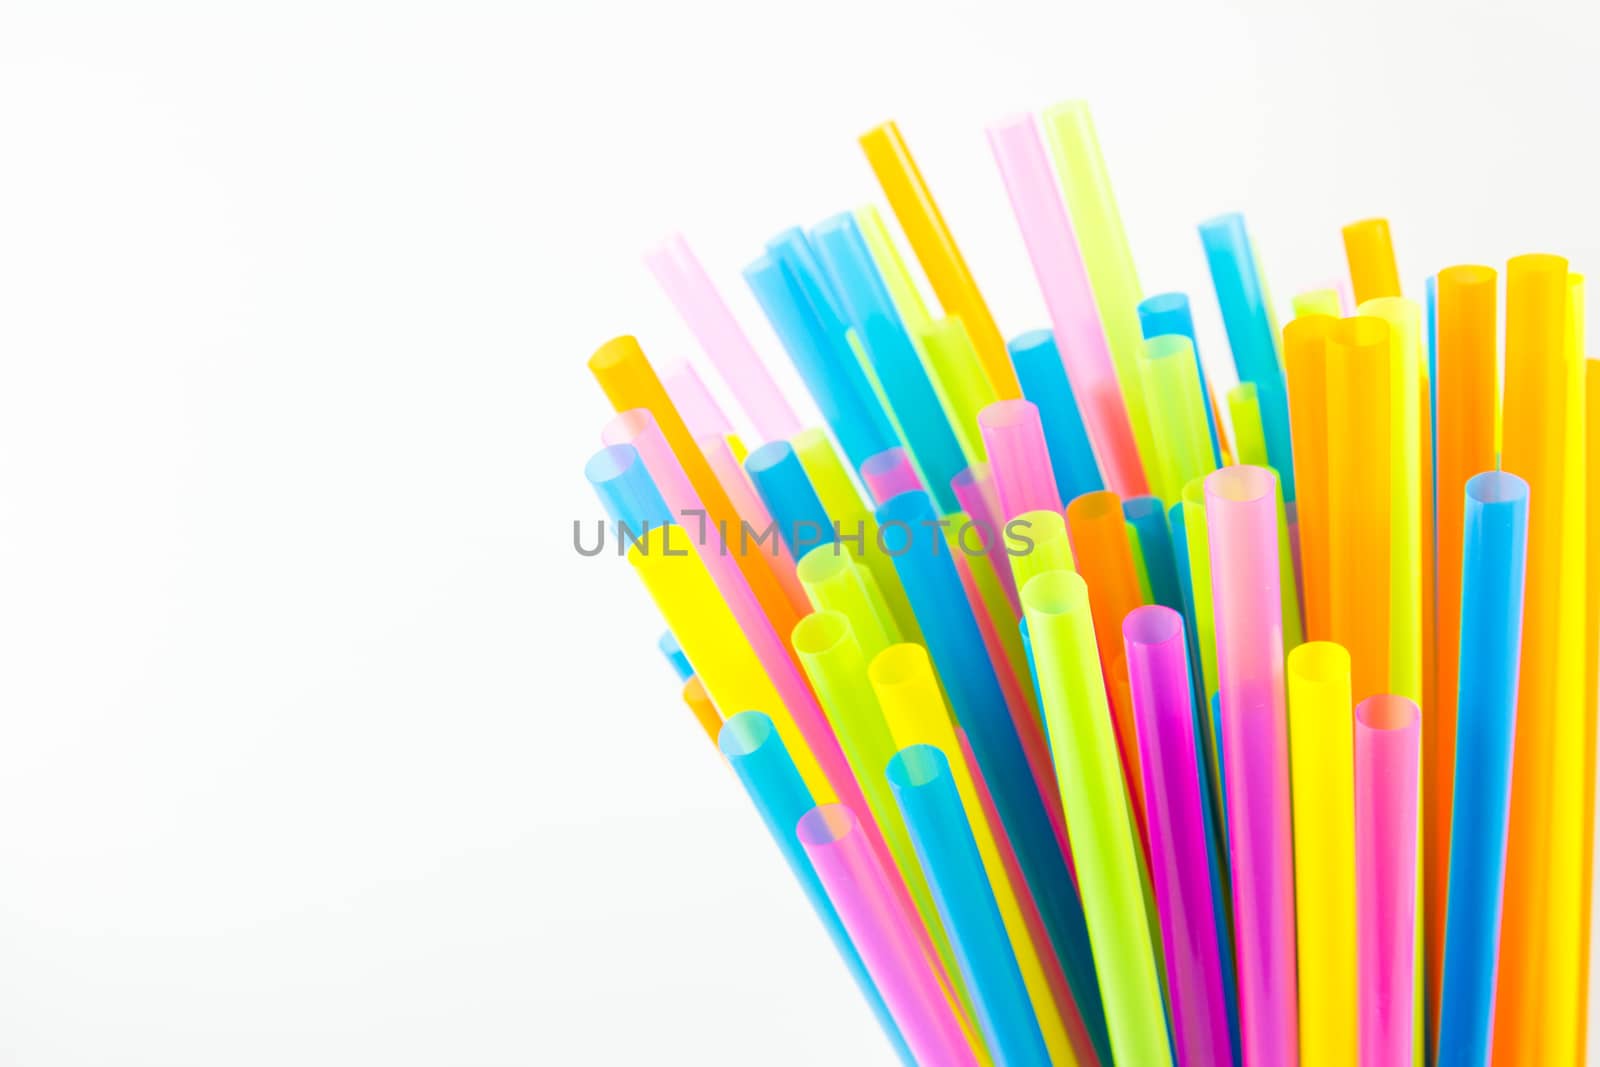 Colorful drinking straws isolated on white background by kasinv